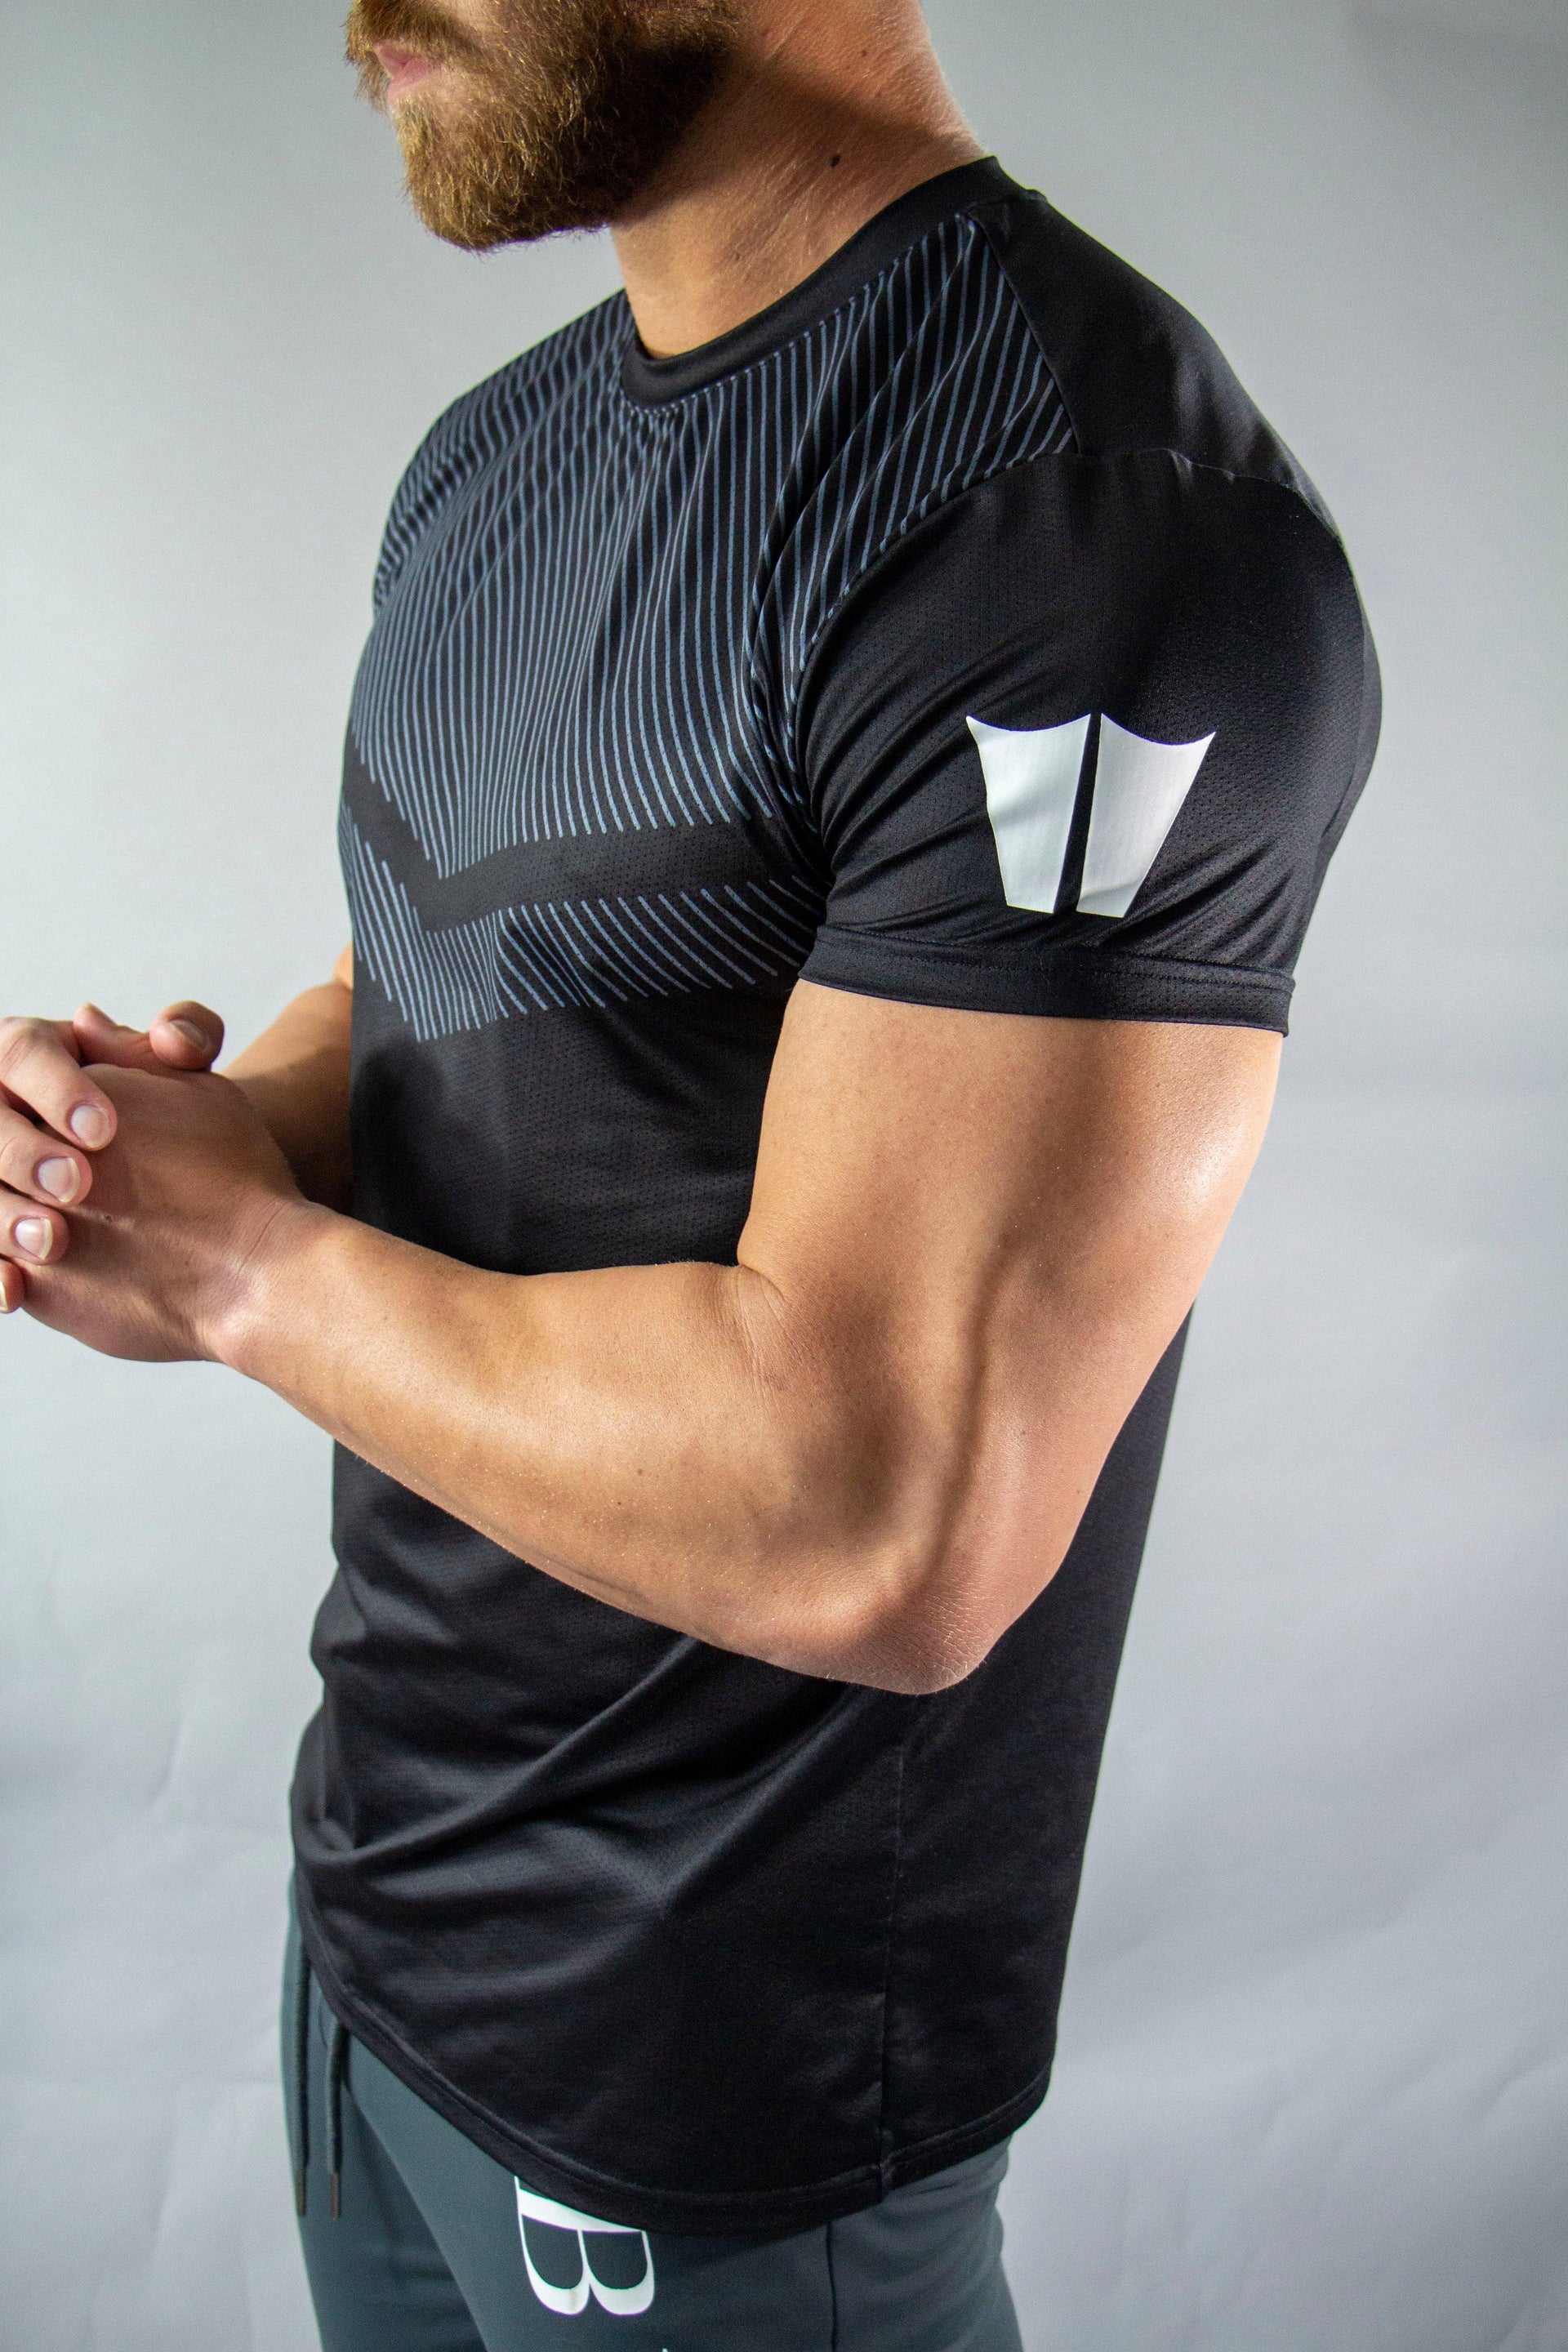 Buy Men's Fitted Compression Shirt in Black